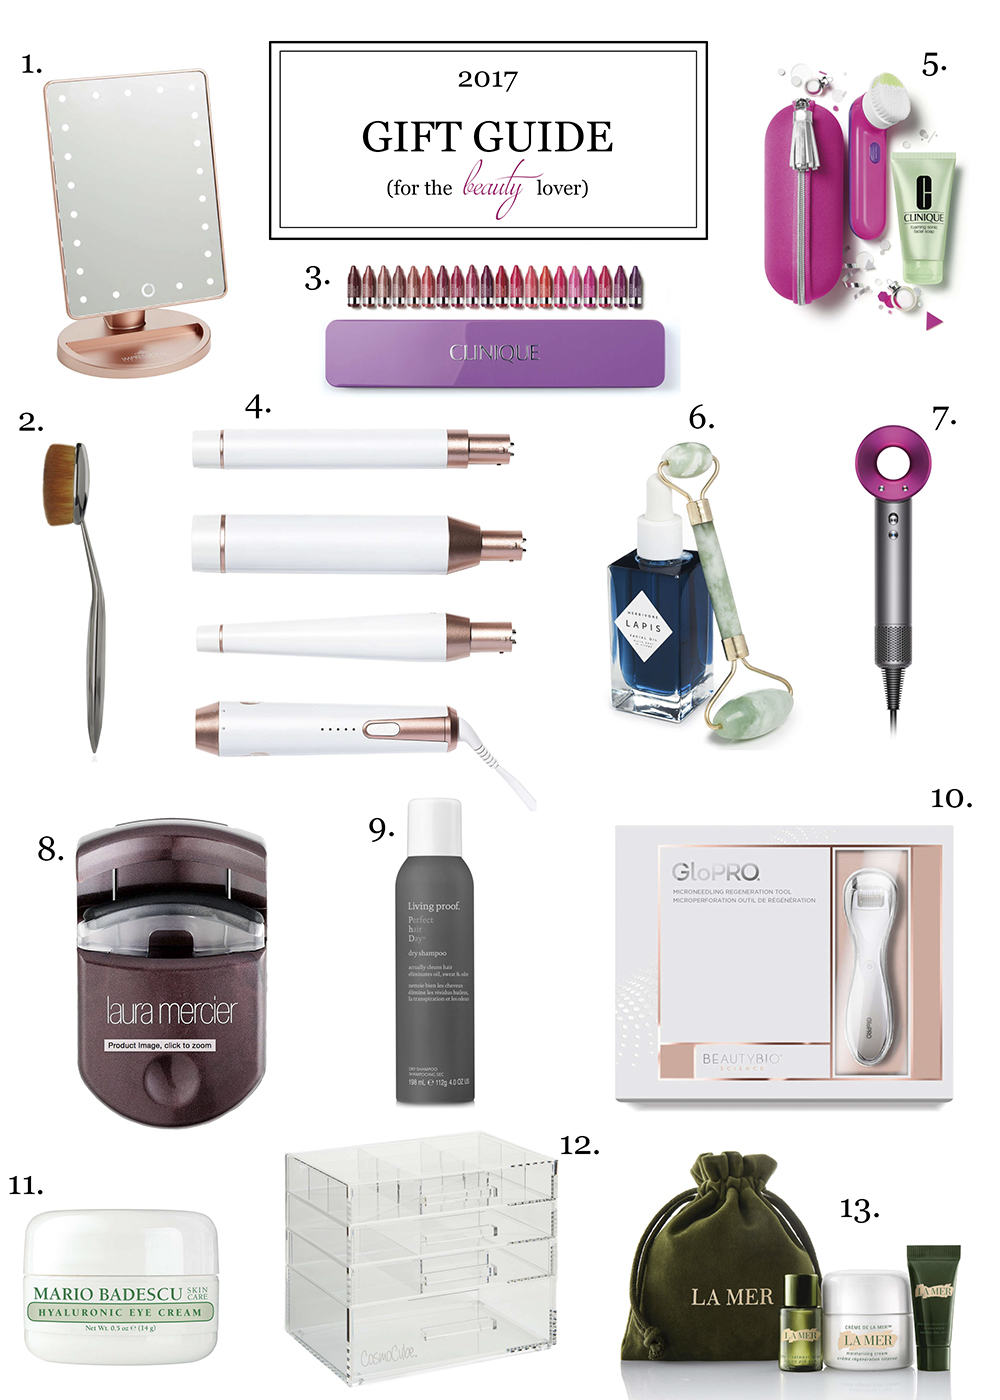 2017 gift guide for women who love beauty products